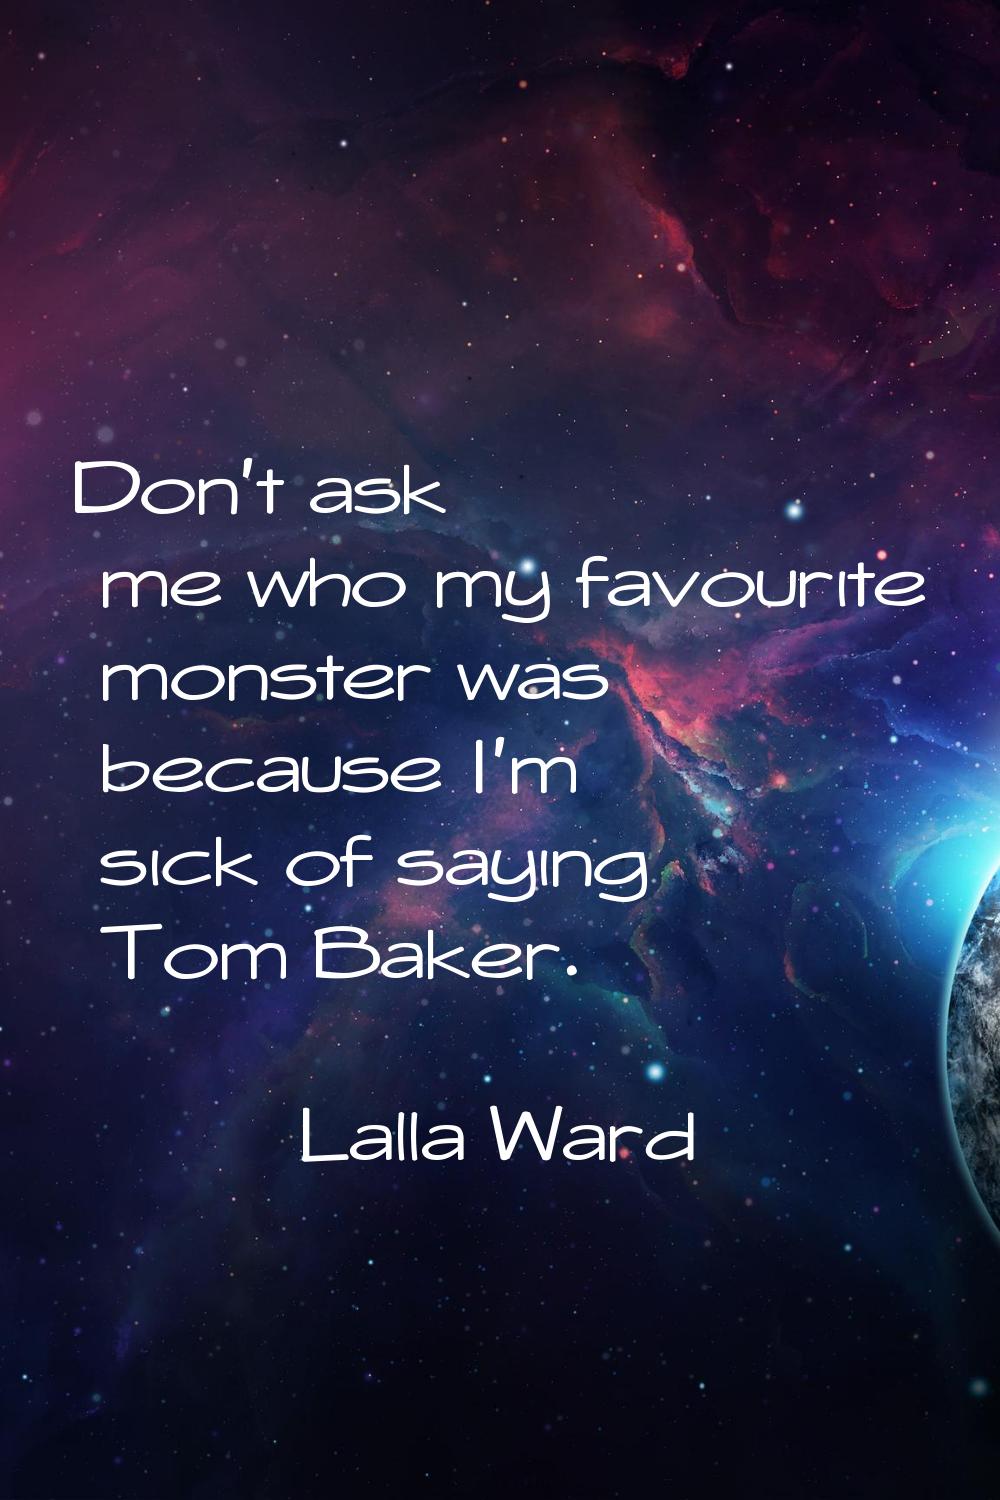 Don't ask me who my favourite monster was because I'm sick of saying Tom Baker.